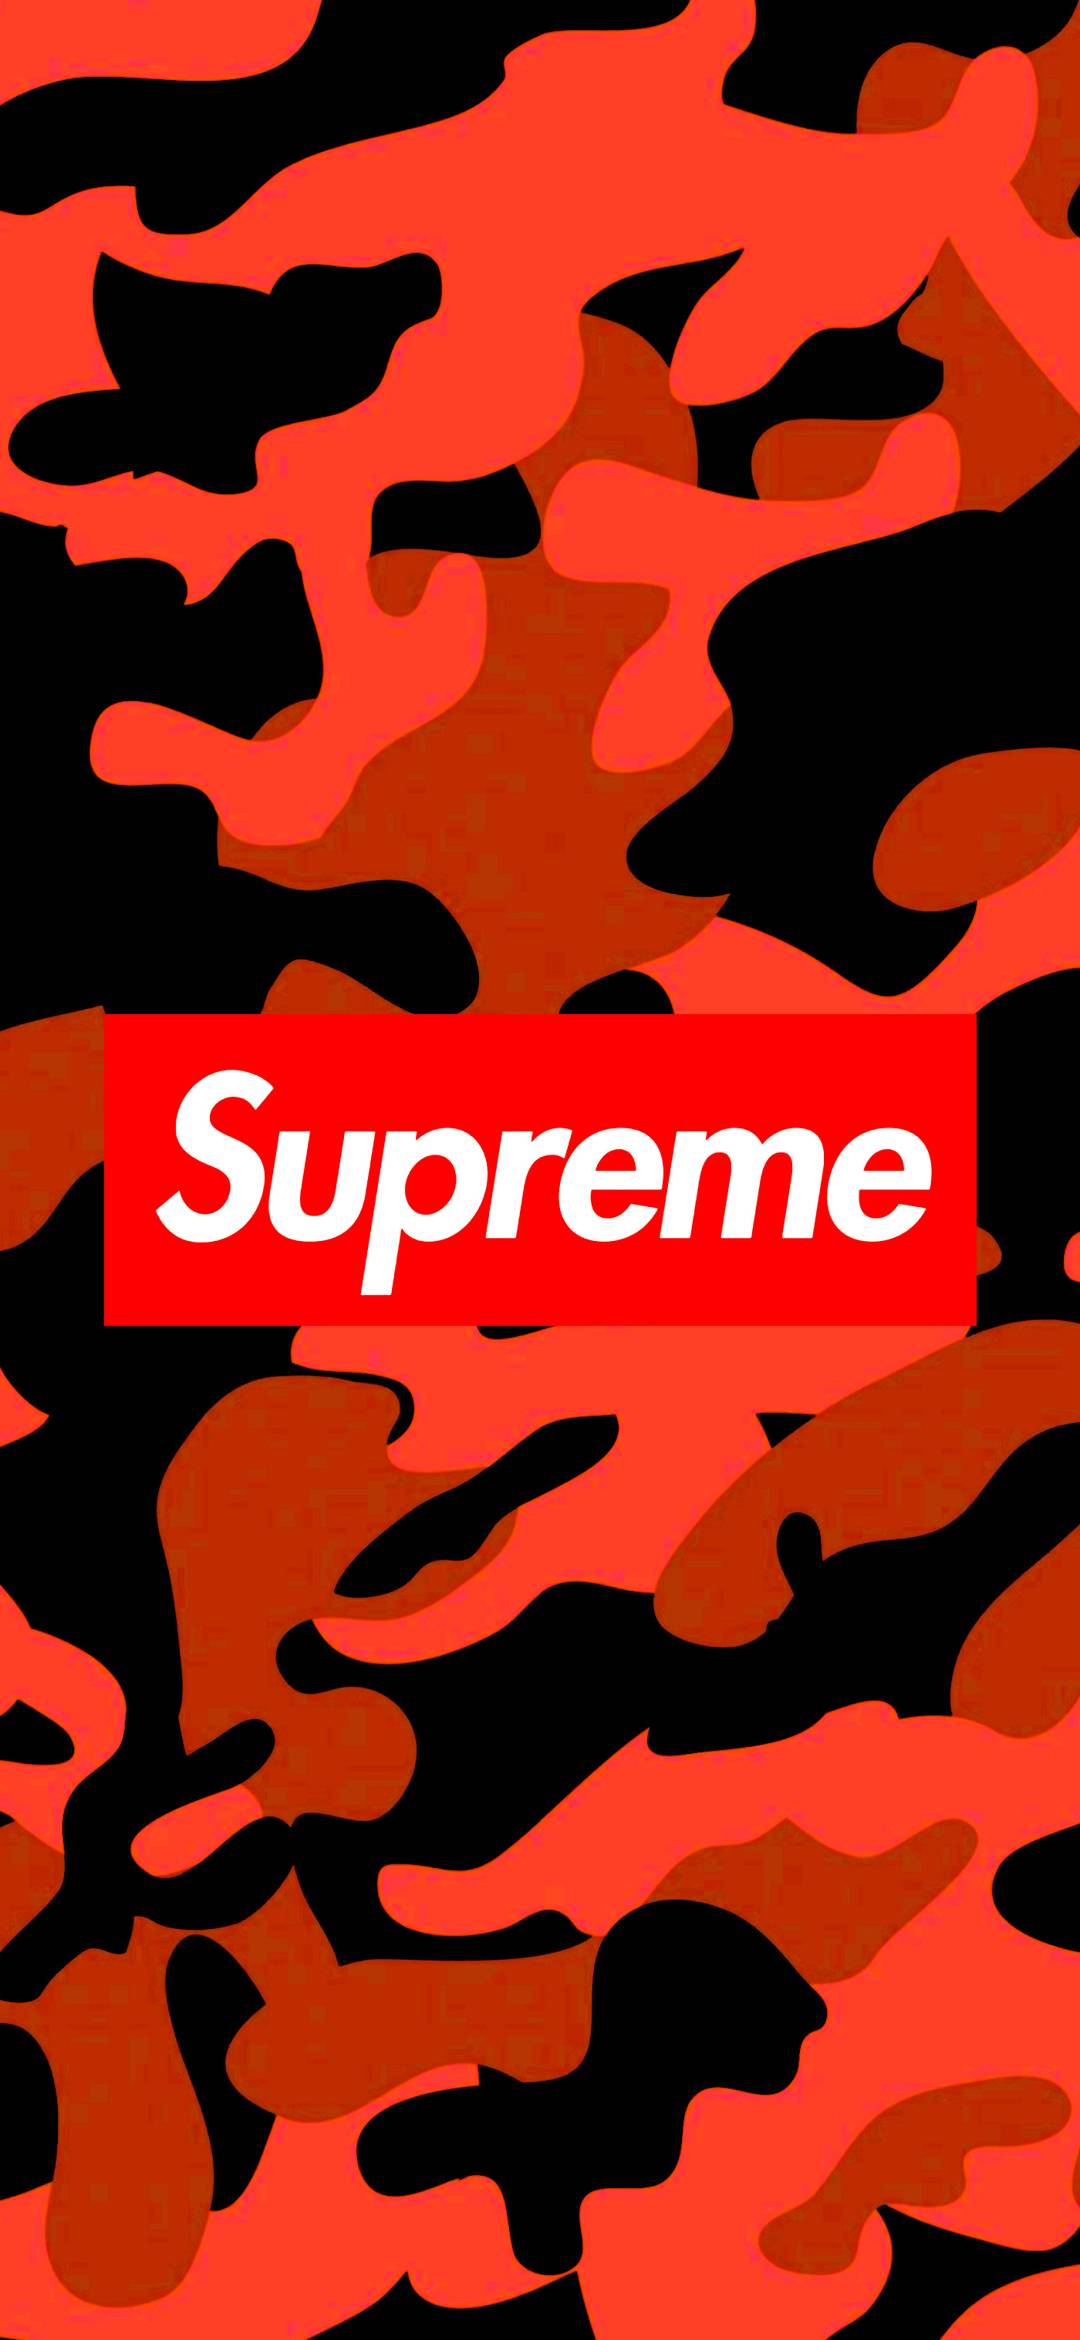 Supreme Red Wallpapers - Top Free Supreme Red Backgrounds ...